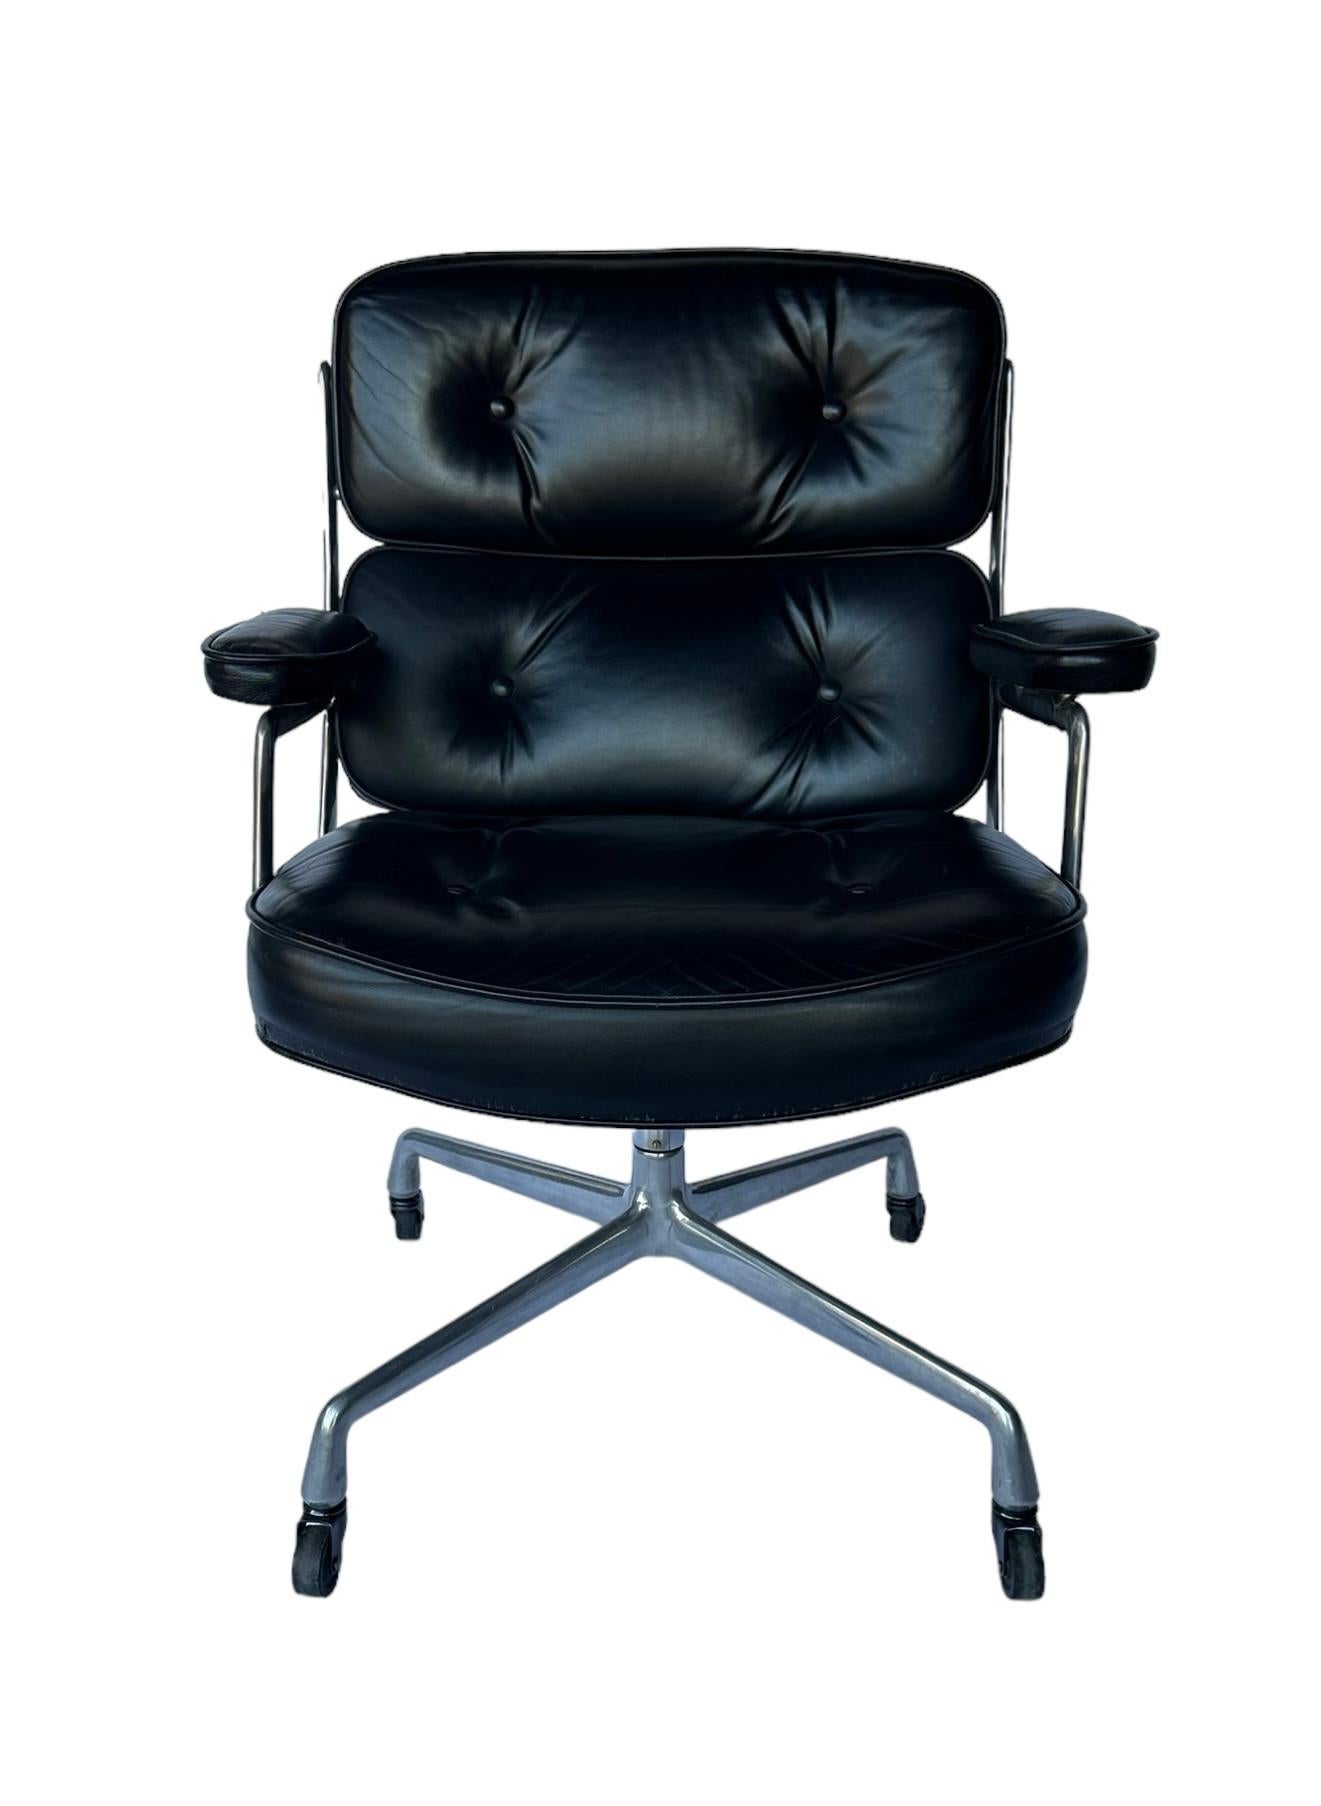 Eames Time Life Office Desk Chair in Black Leather For Sale 9